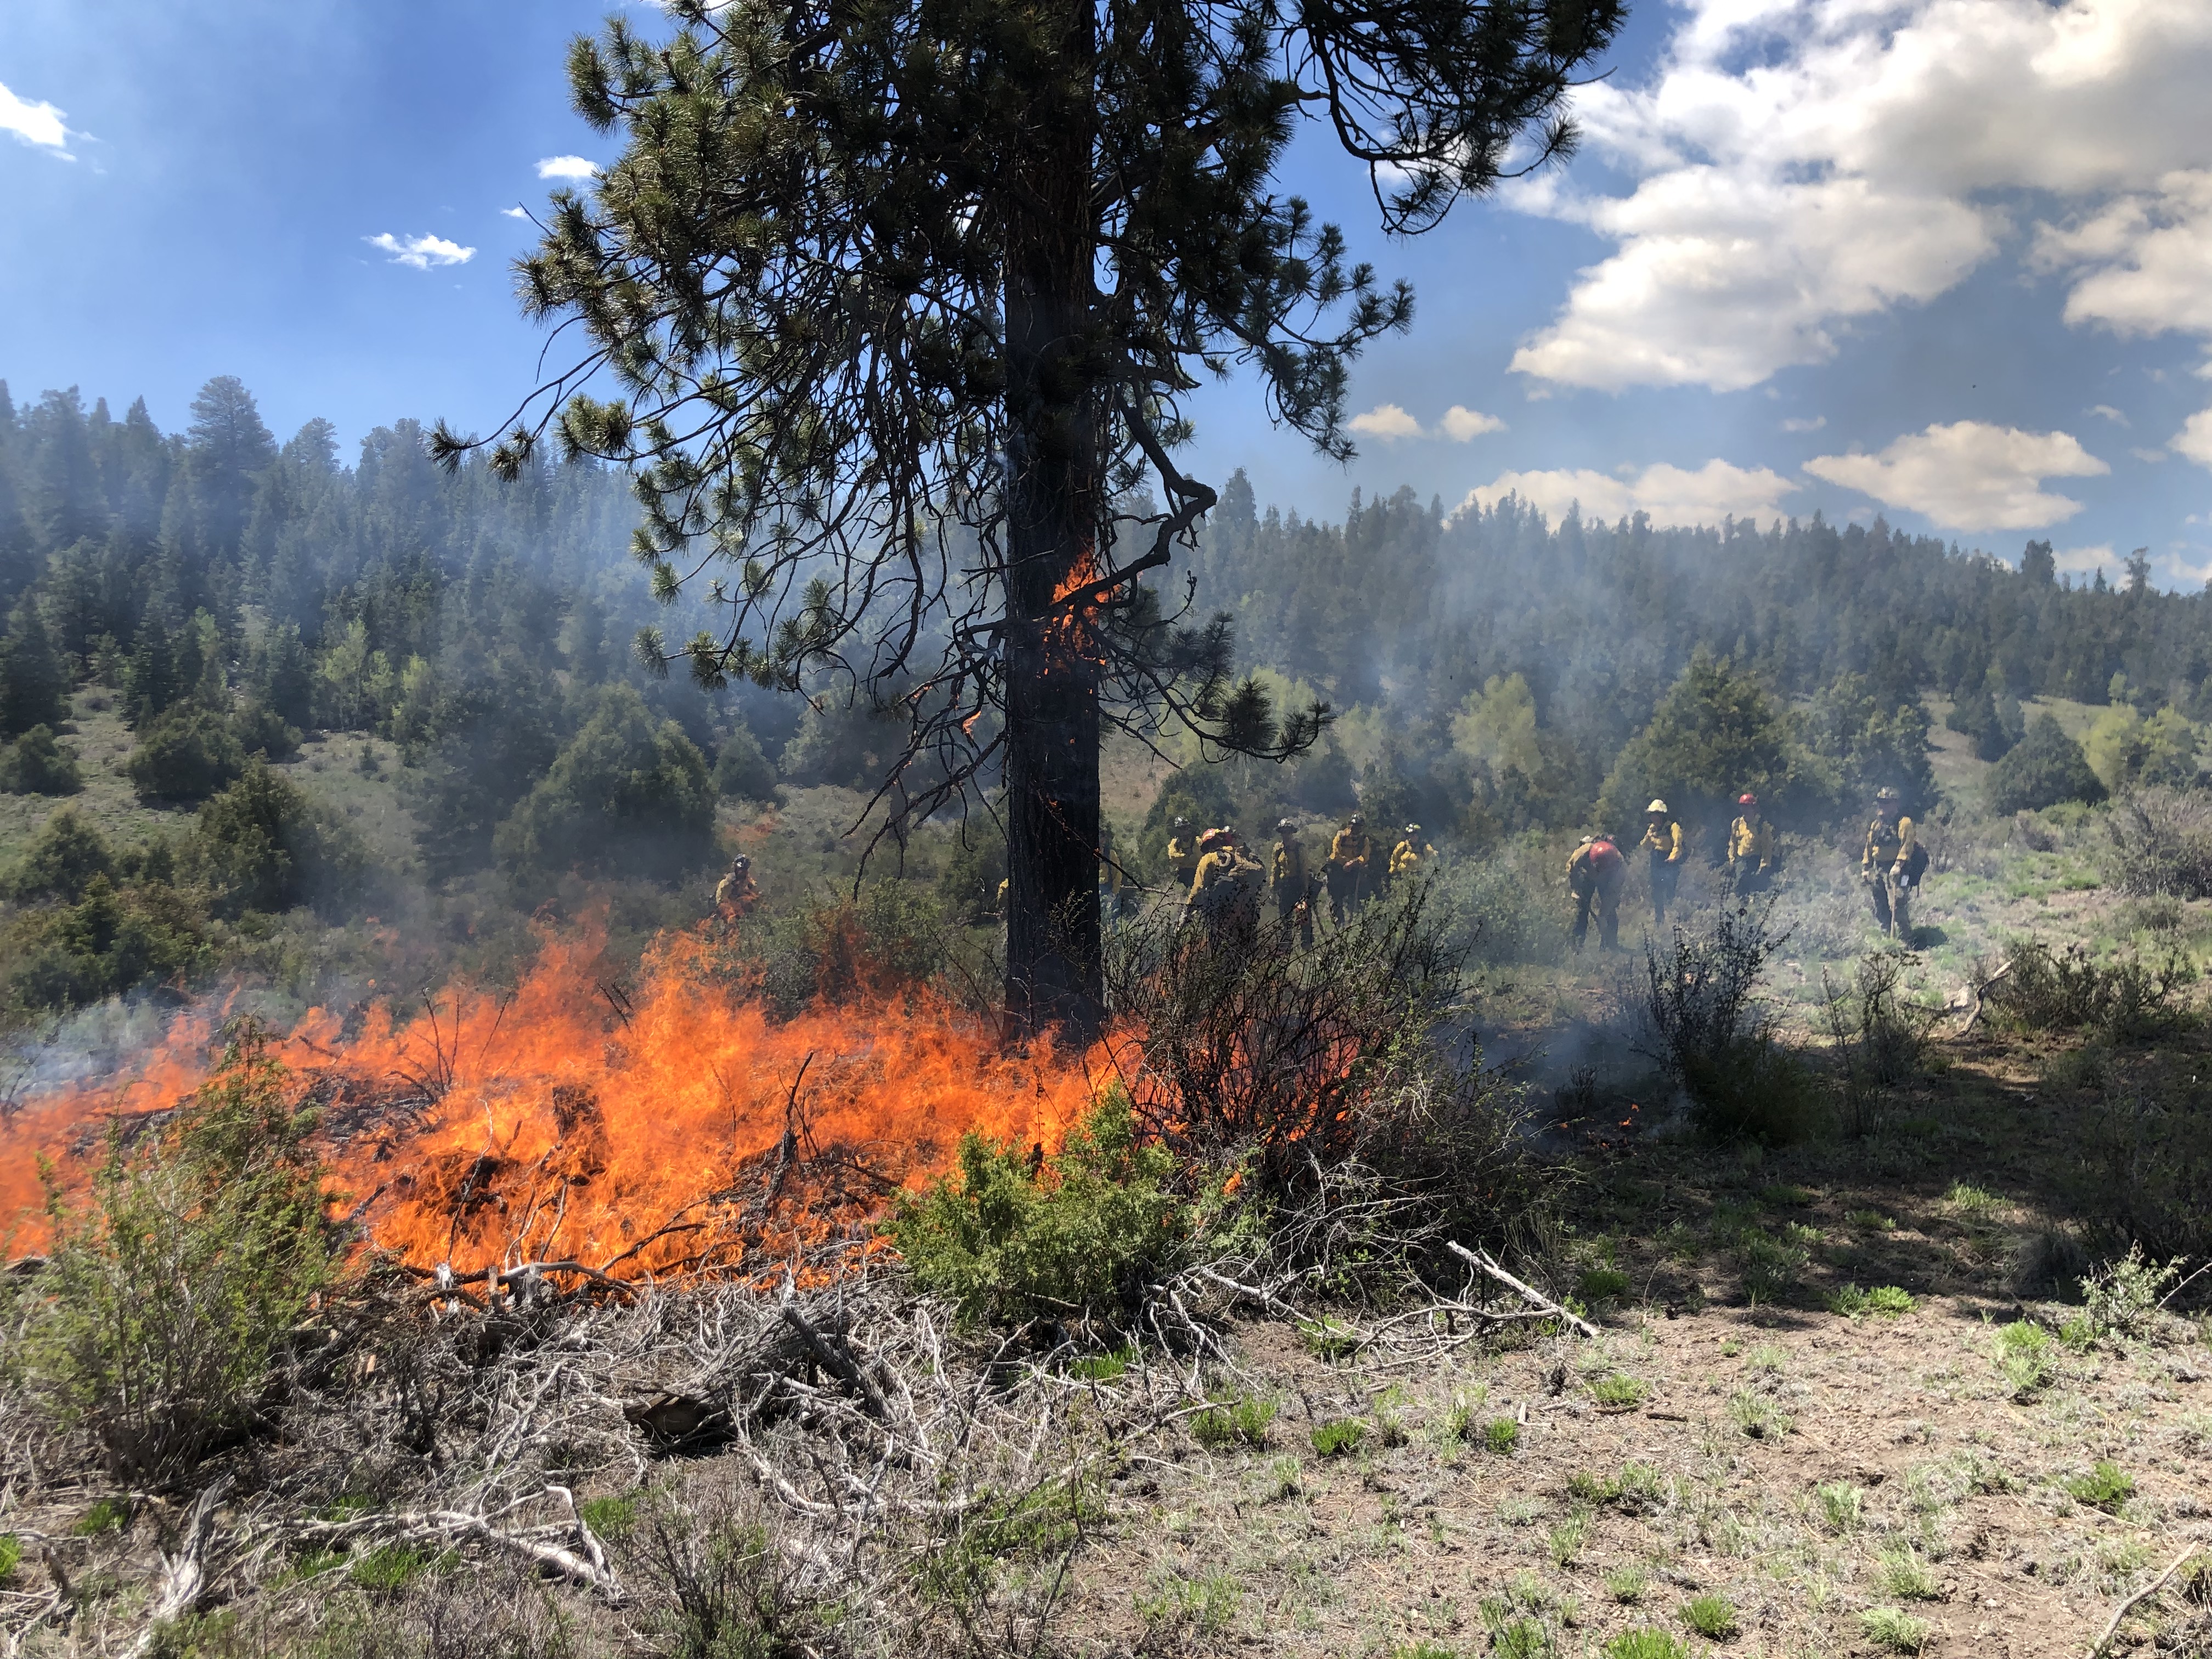 Fire burns under a Culturally Modified Tree (ponderosa pine) with firefighters in the background.